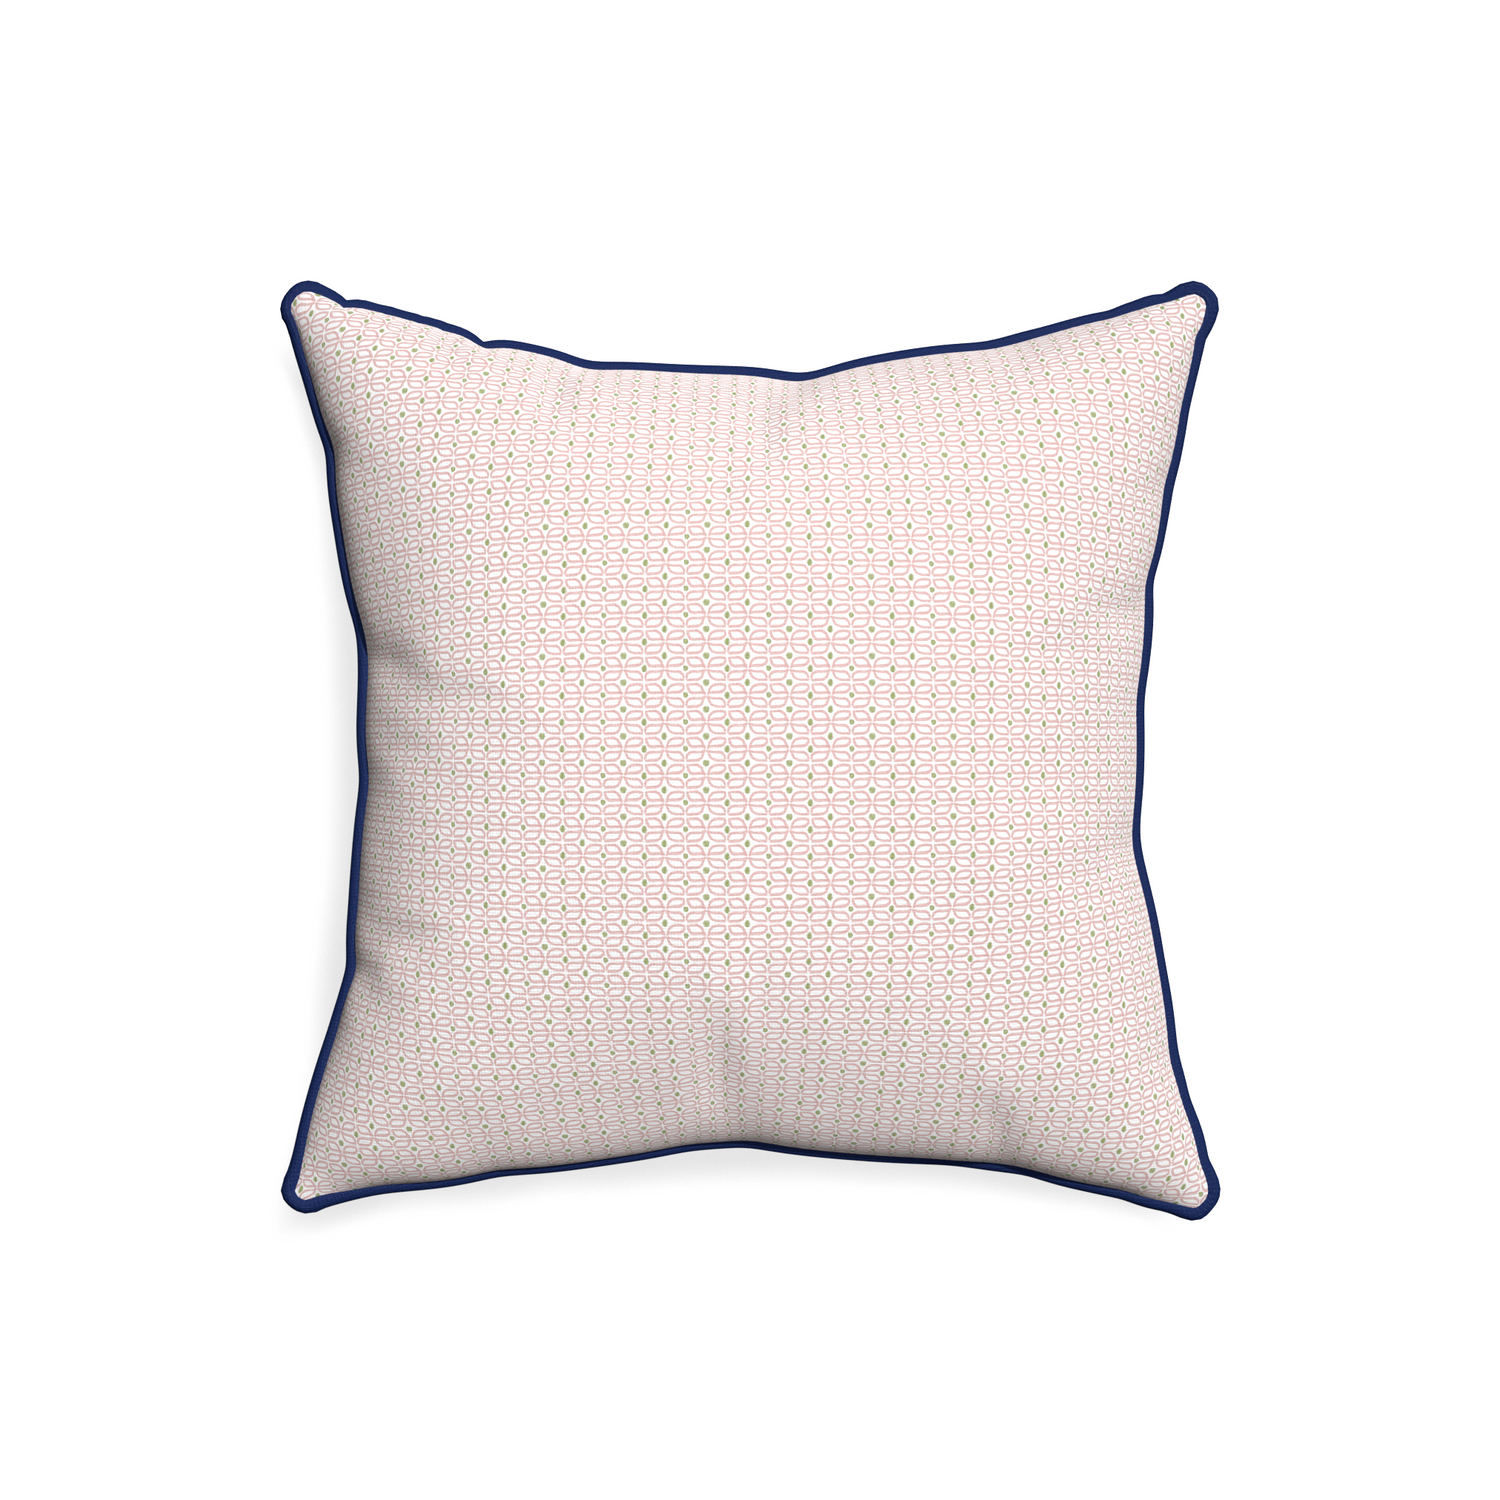 20-square loomi pink custom pink geometricpillow with midnight piping on white background